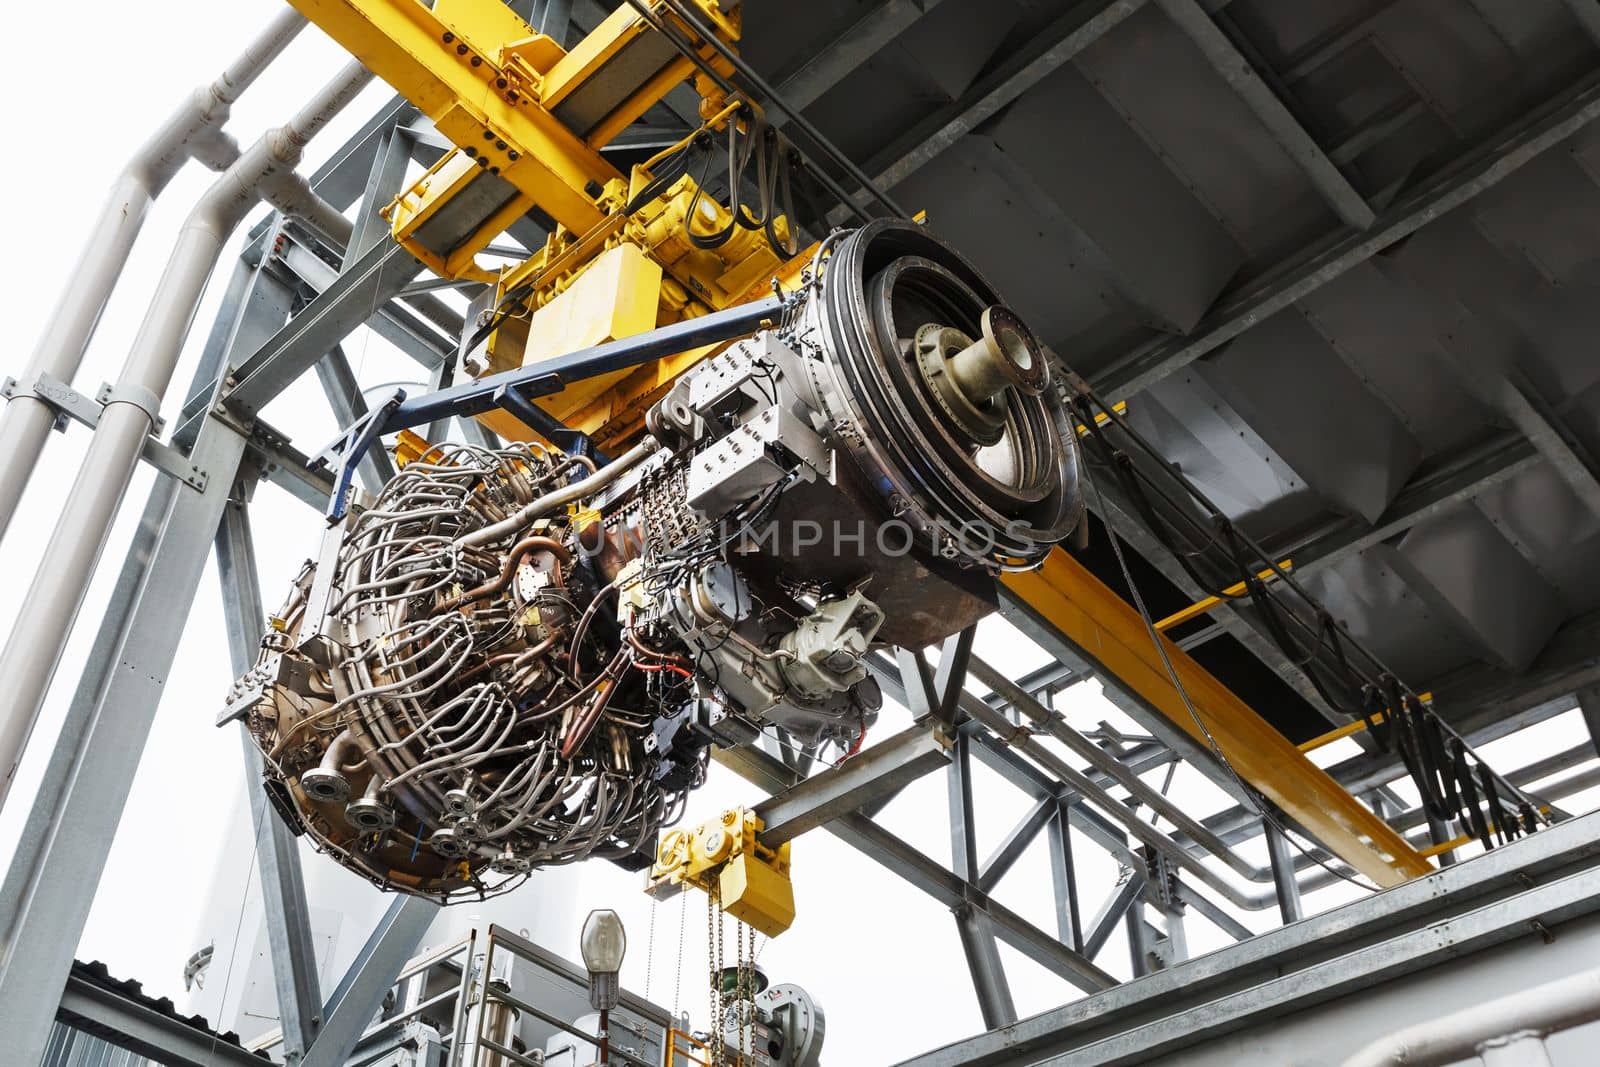 Installation of a gas turbine engine to generate electricity after repair and maintenance by AlexGrec